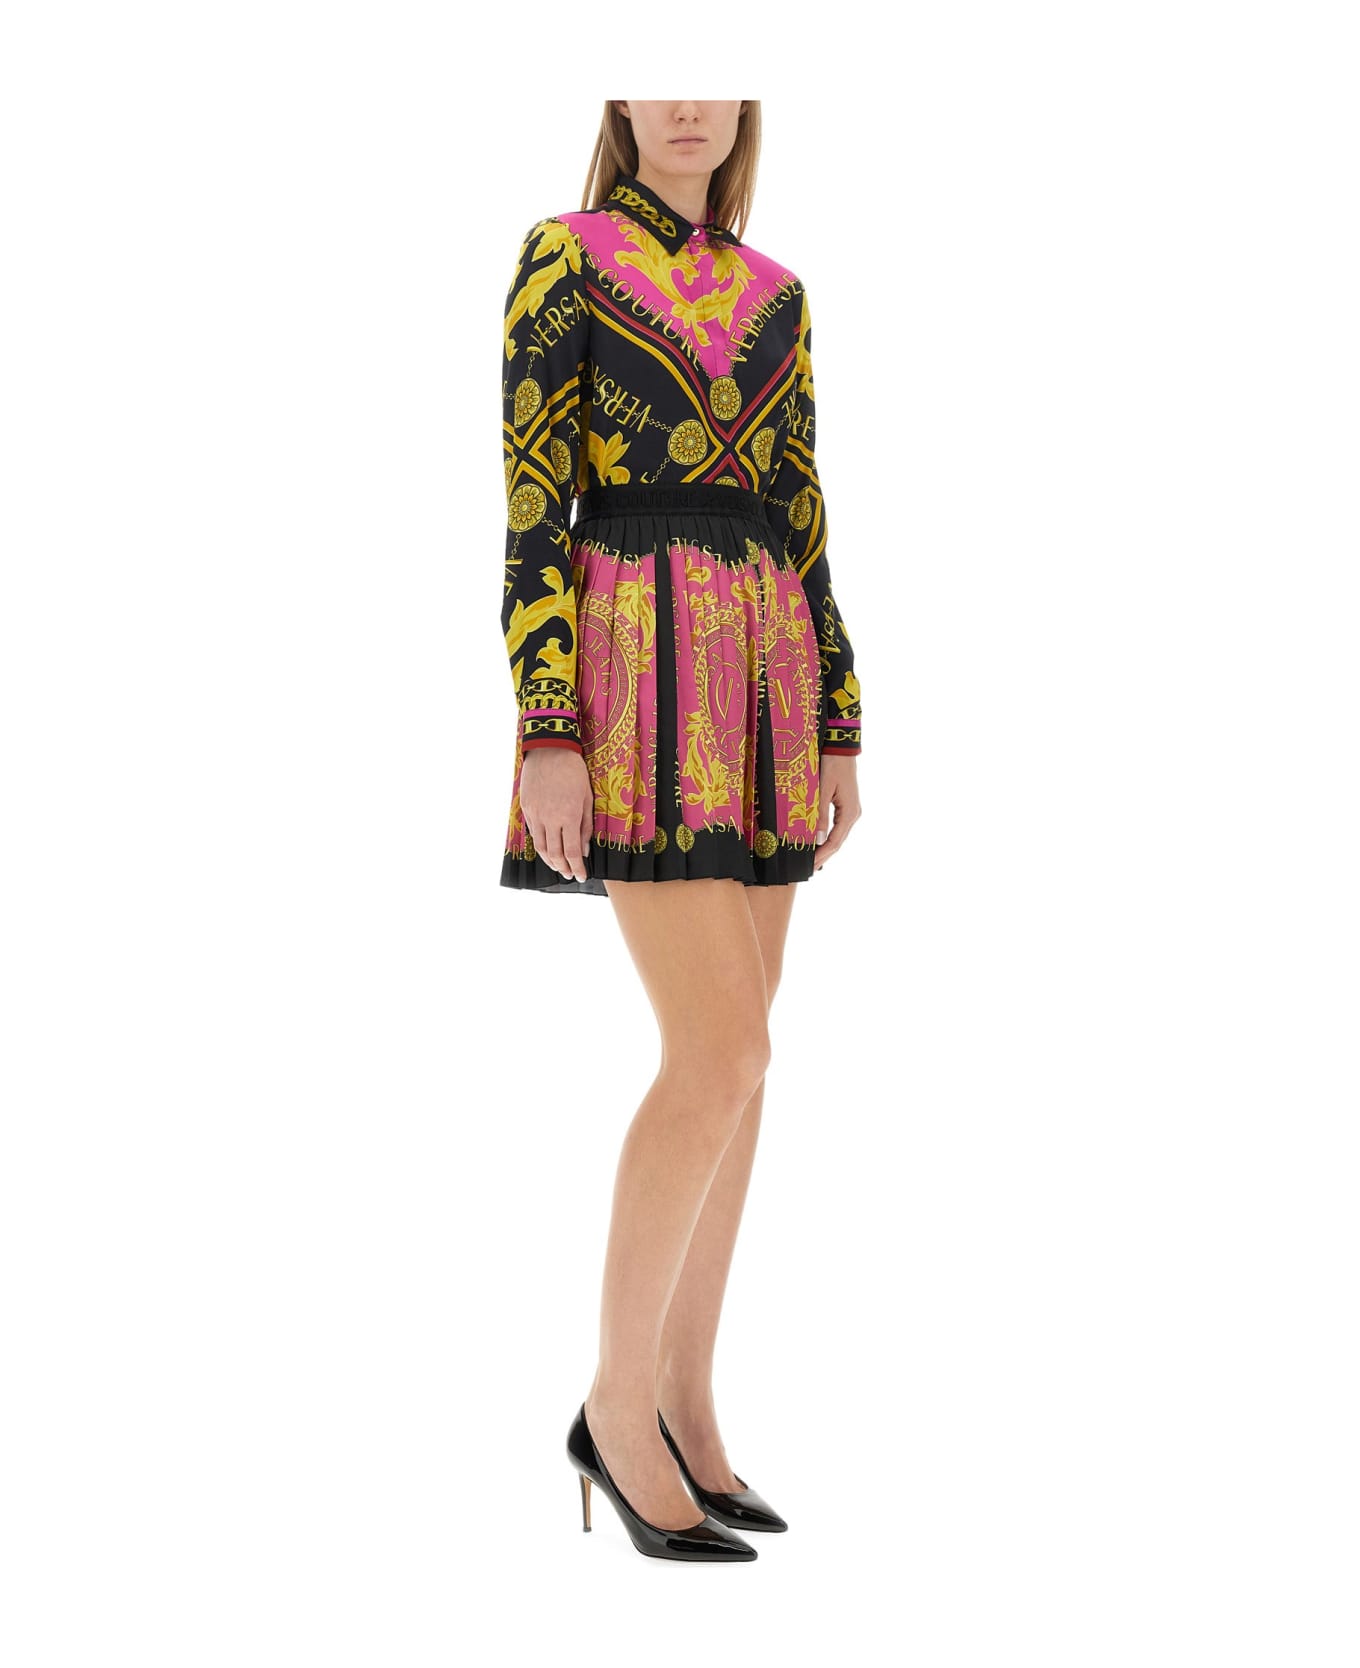 Versace Jeans Couture Printed Long Sleeves Shirt - Fantasia